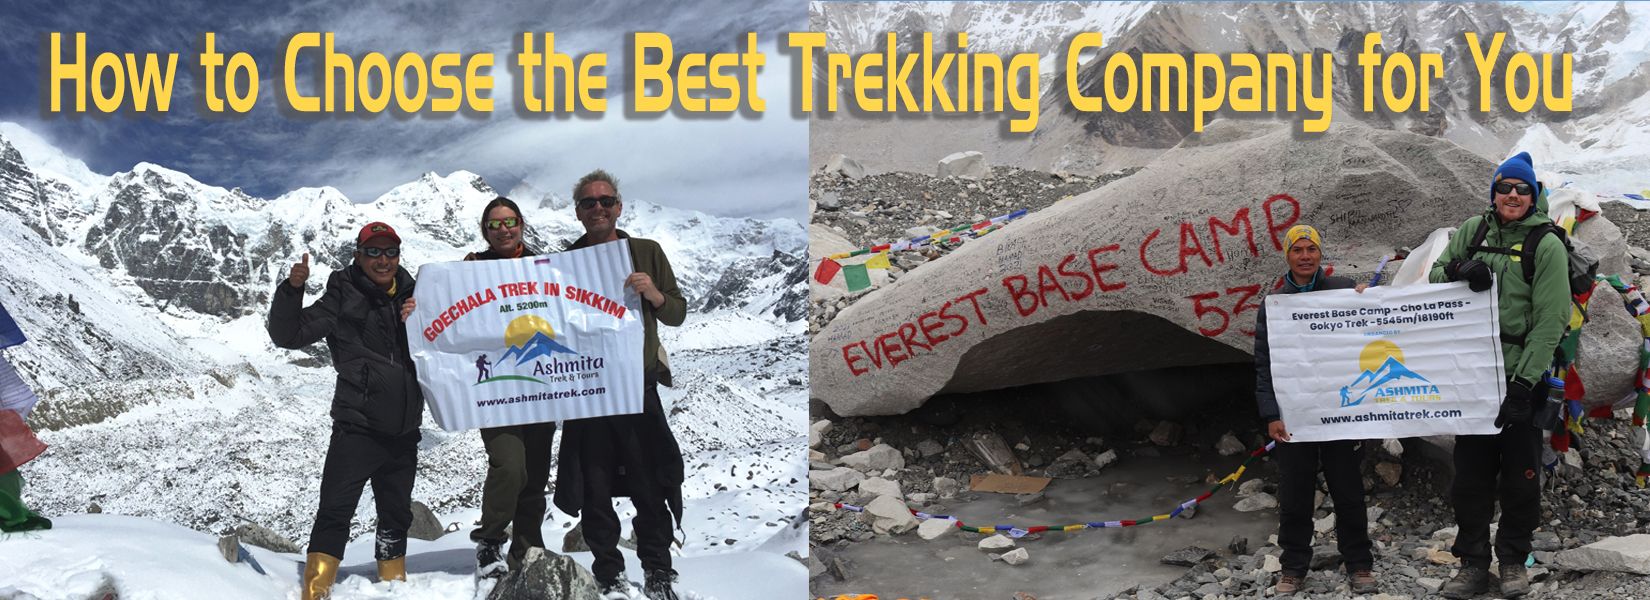 How to Choose the Best Trekking Company for You